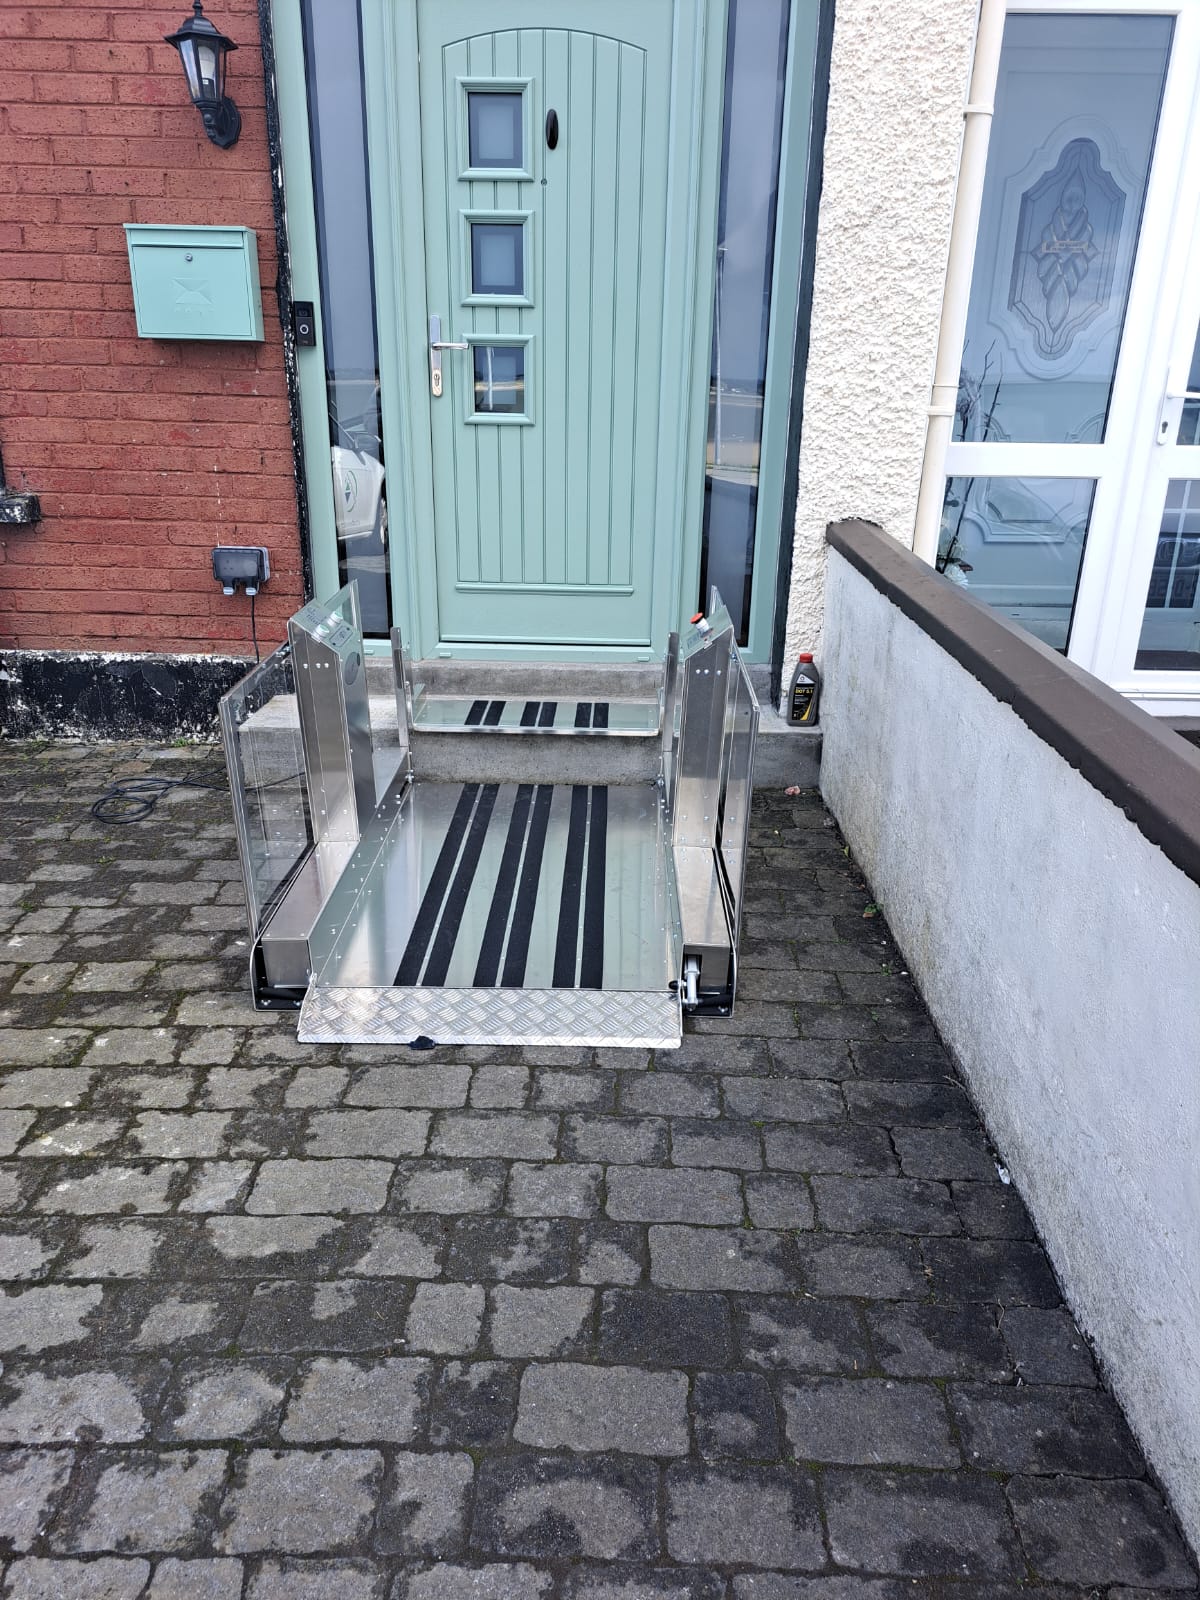 a metal bench sitting in front of a blue door.